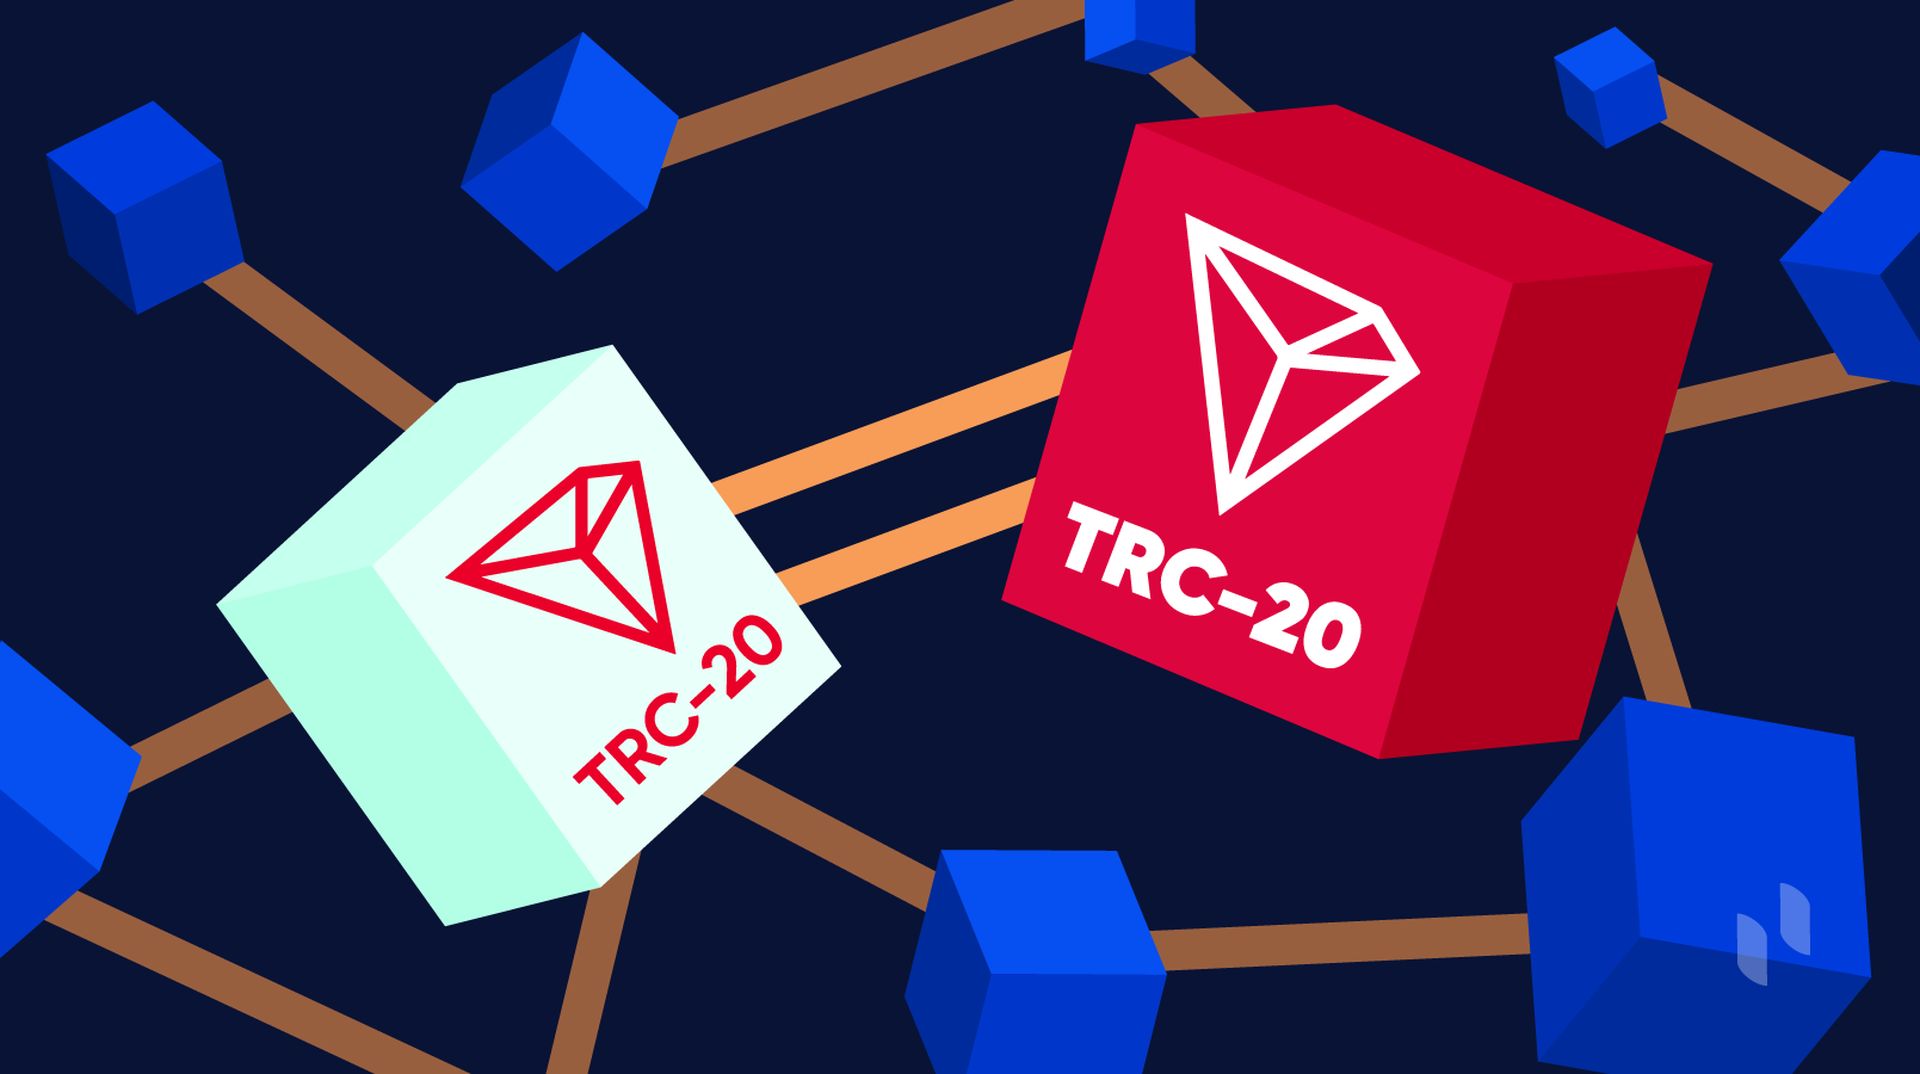 Today, we'll be looking at two popular token standarts, and will be comparing ERC20 vs TRC20 on how they work, the tokens that utilize them in the market and much more.